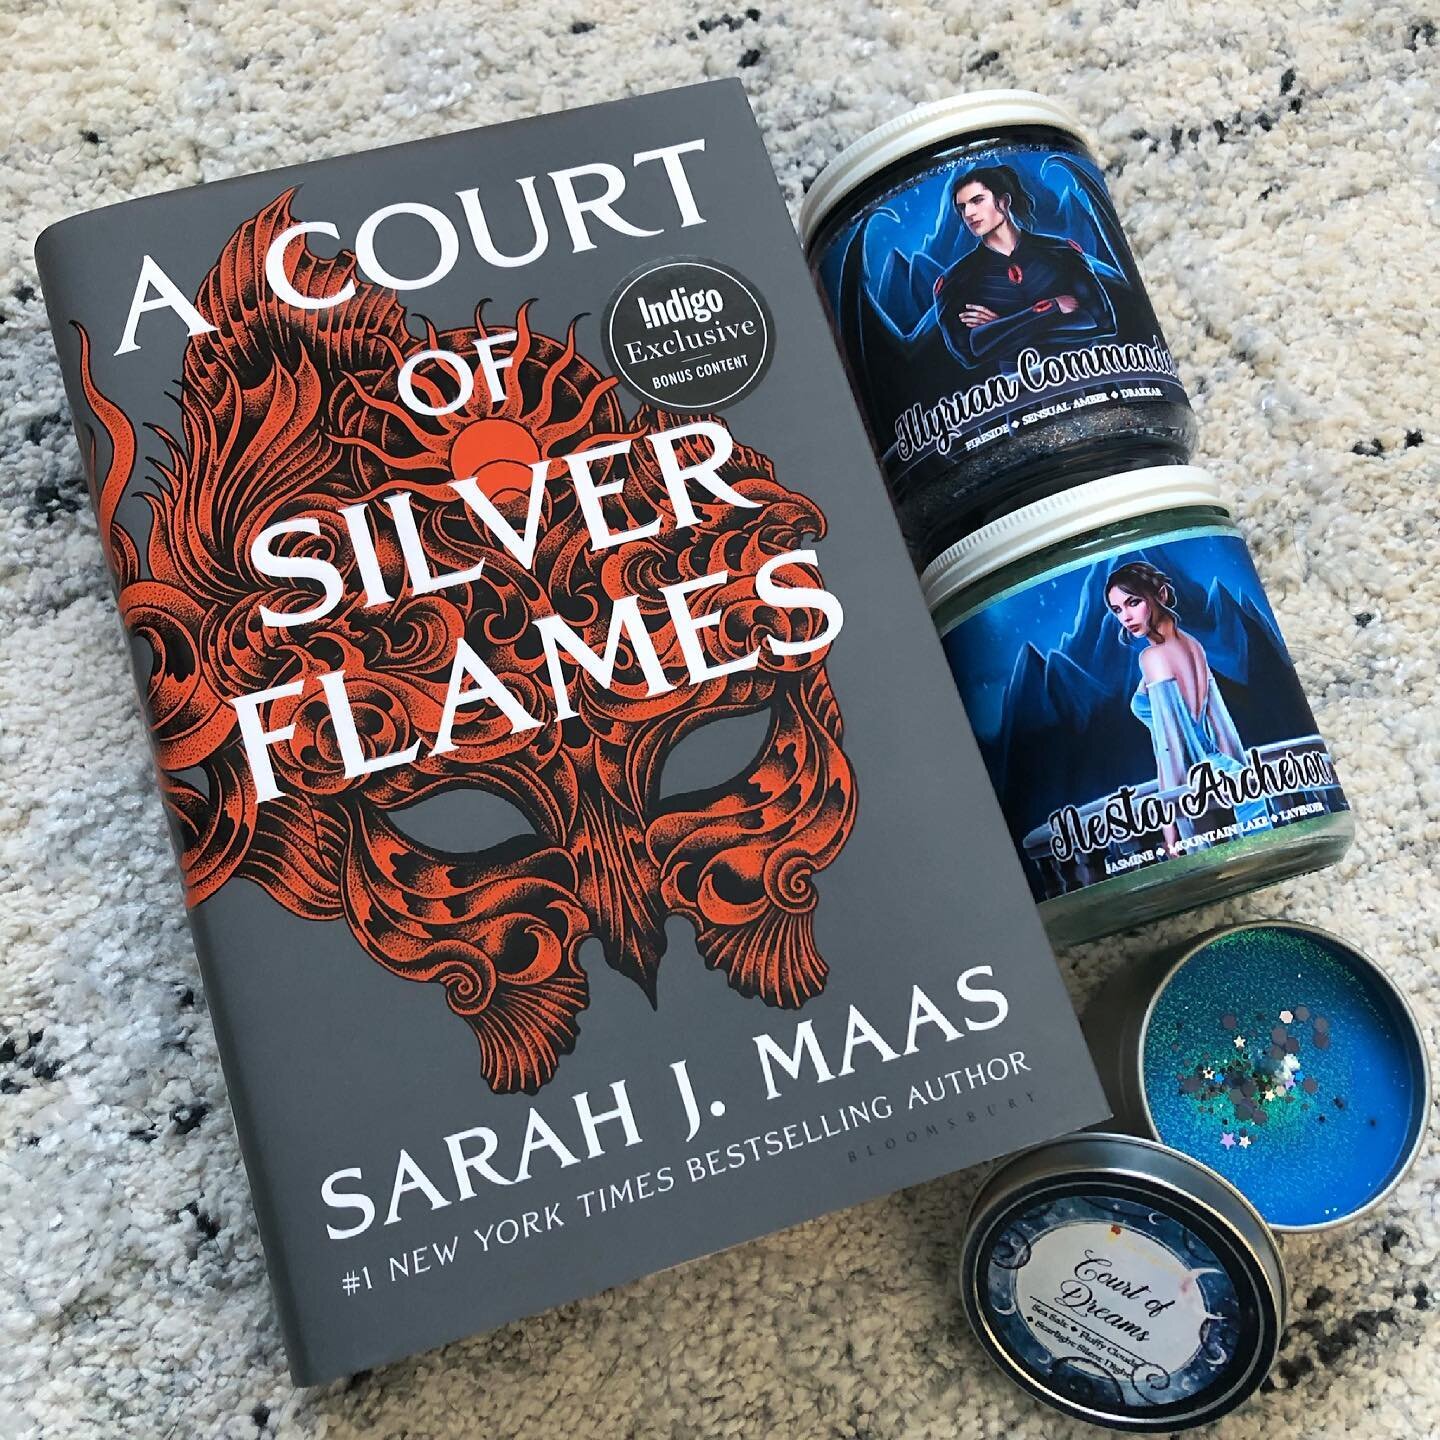 &ldquo;I like to read. I cannot survive without reading.&rdquo; - A Court of Silver Flames 🔥 

___________________________________

Hello book charmers! I&rsquo;m sorry I&rsquo;ve been away from Instagram for so long. Things have been a bit chaotic 